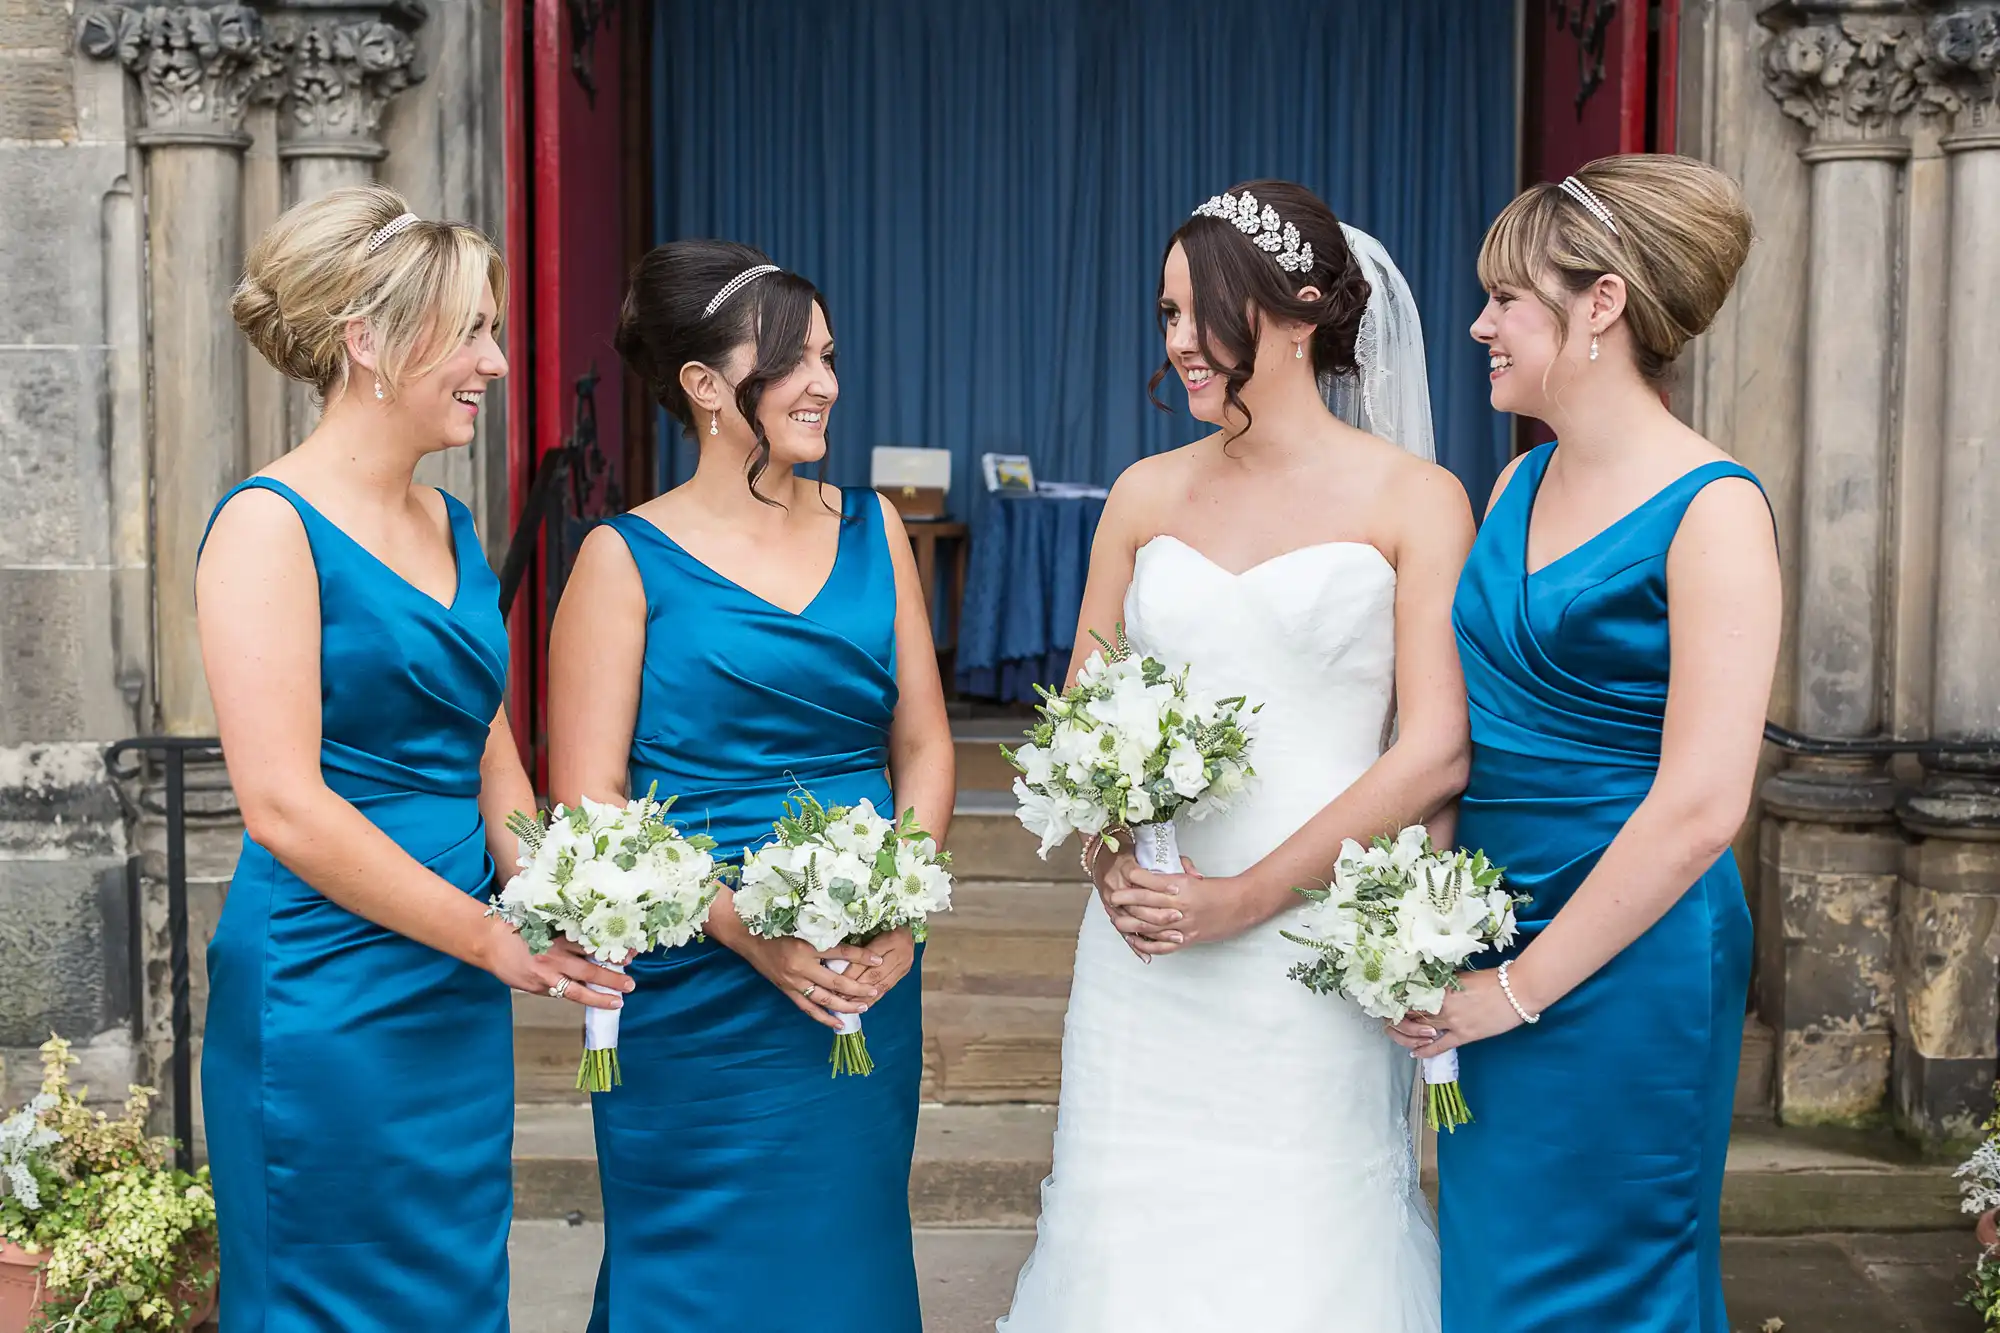 A bride in a white dress smiles at three bridesmaids in blue dresses, each holding a bouquet, standing outside a church.